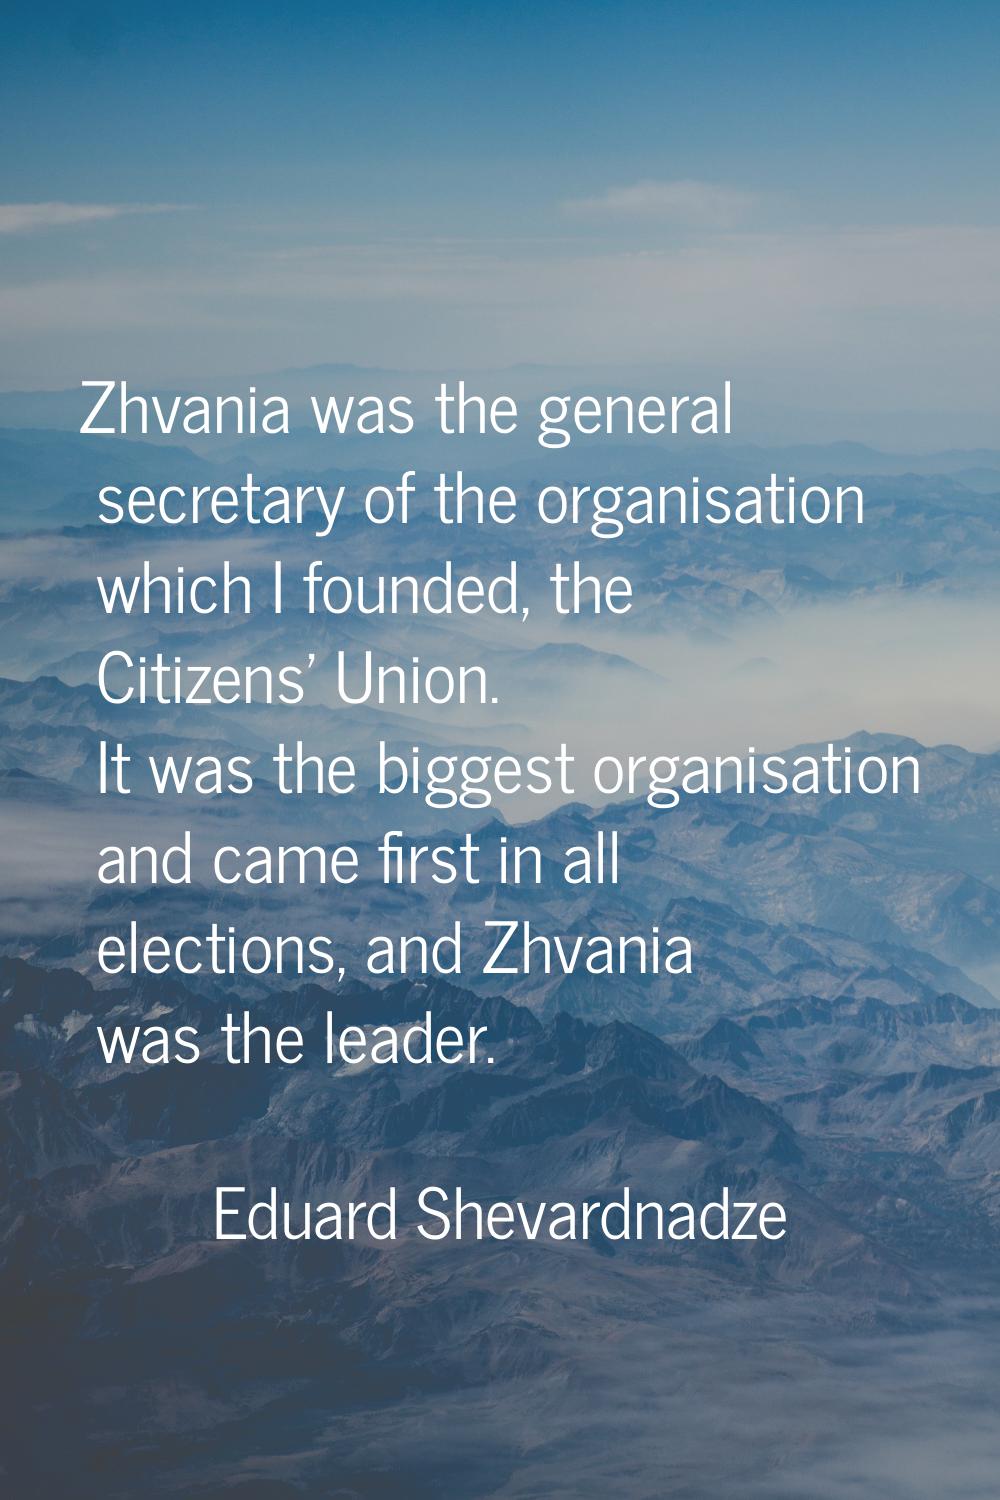 Zhvania was the general secretary of the organisation which I founded, the Citizens' Union. It was 